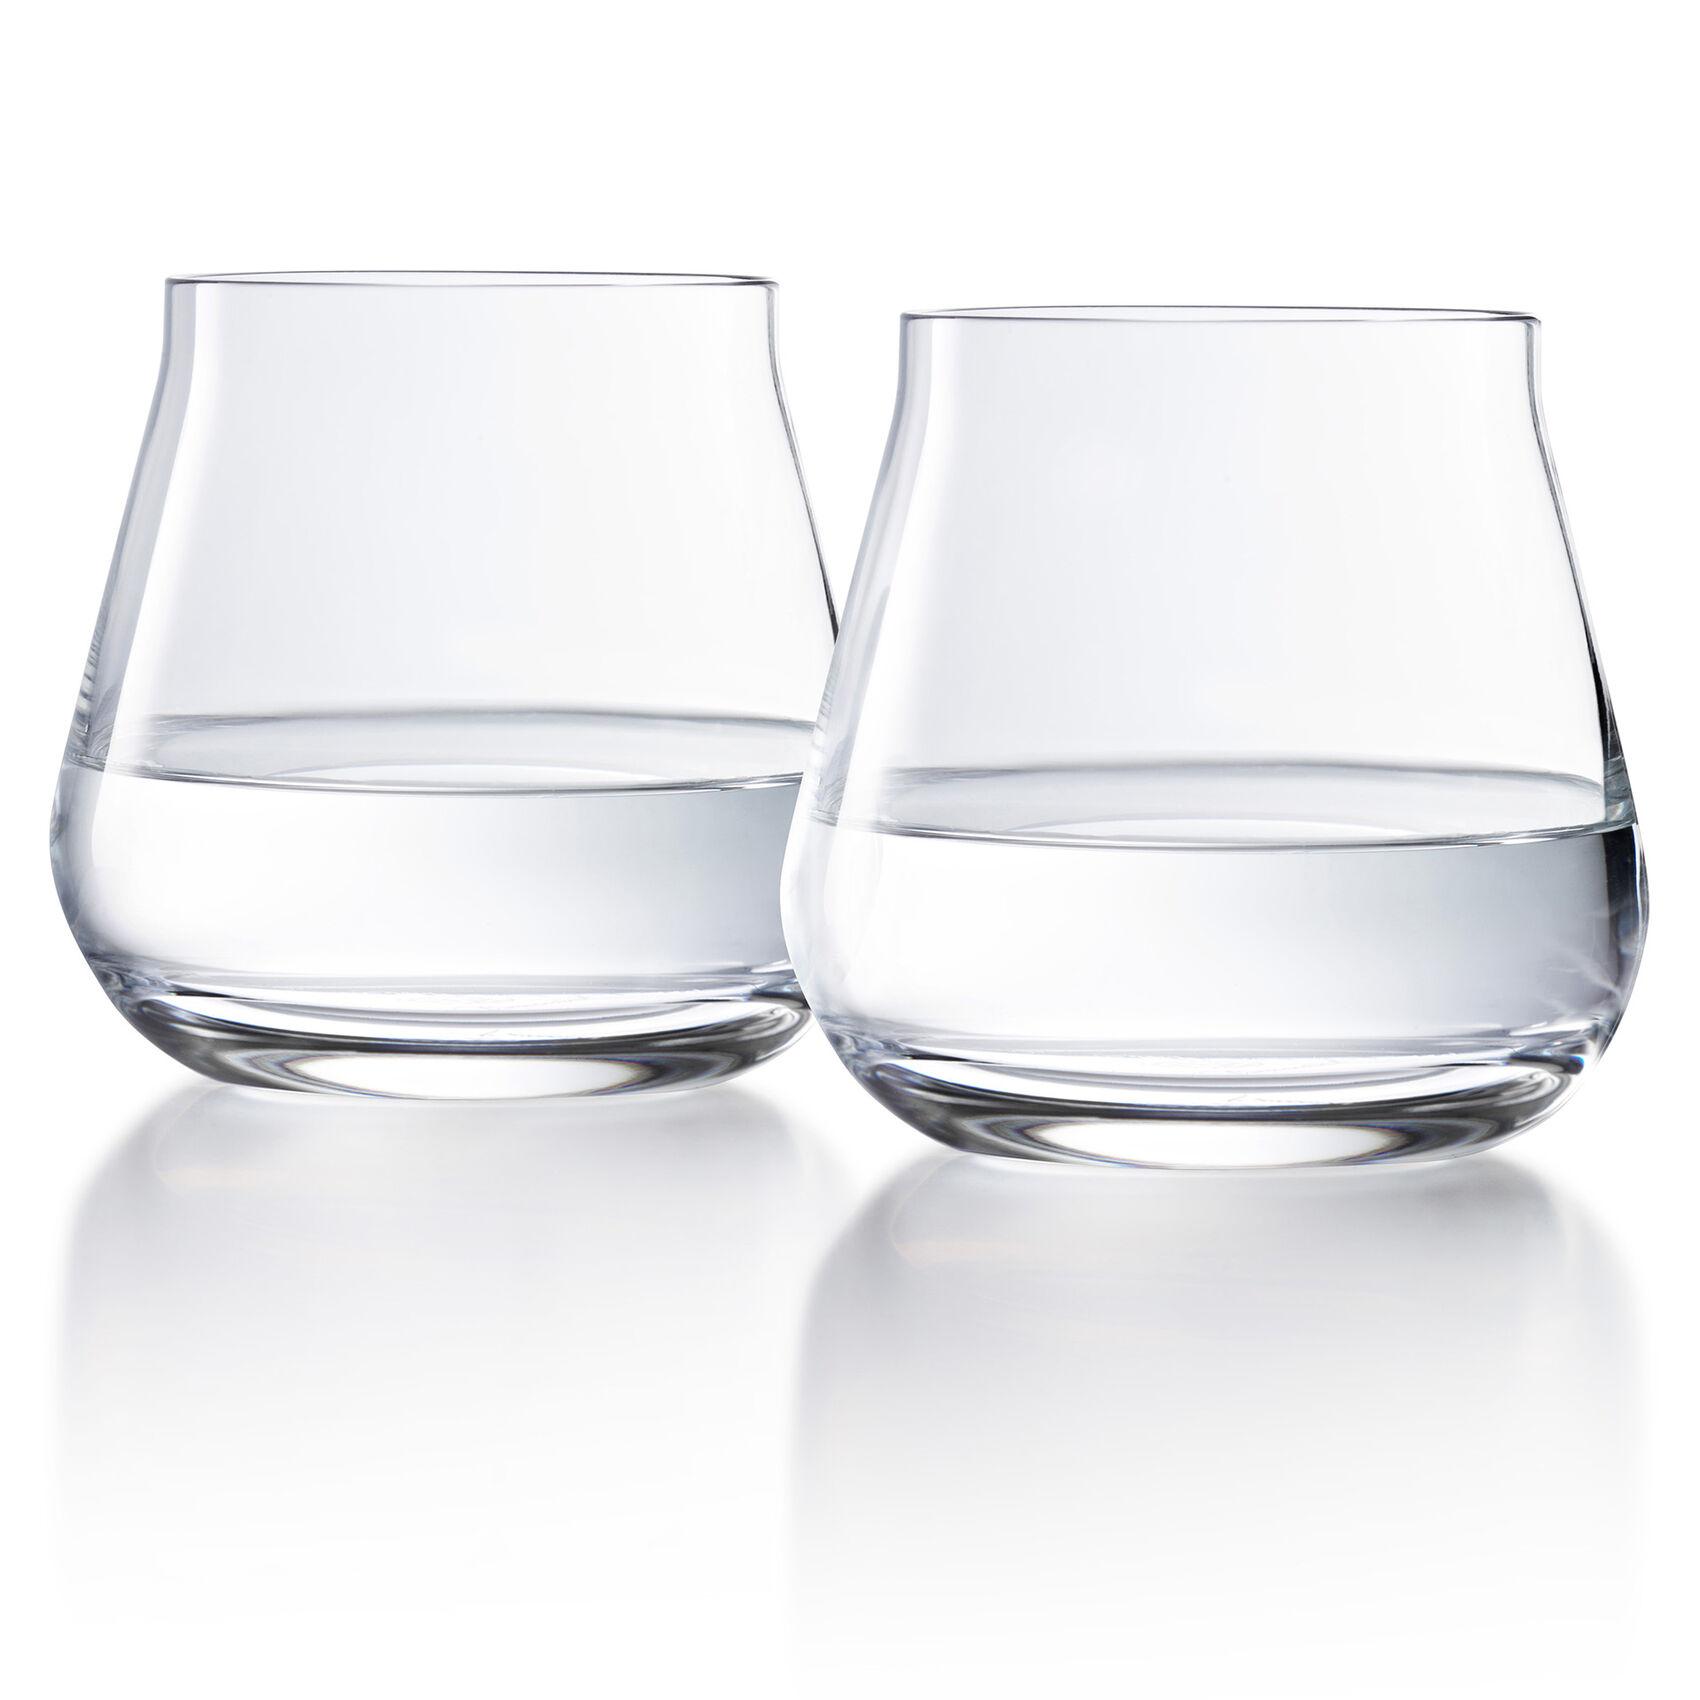 Baccarat Chateau Small Tumblers, set of two 0